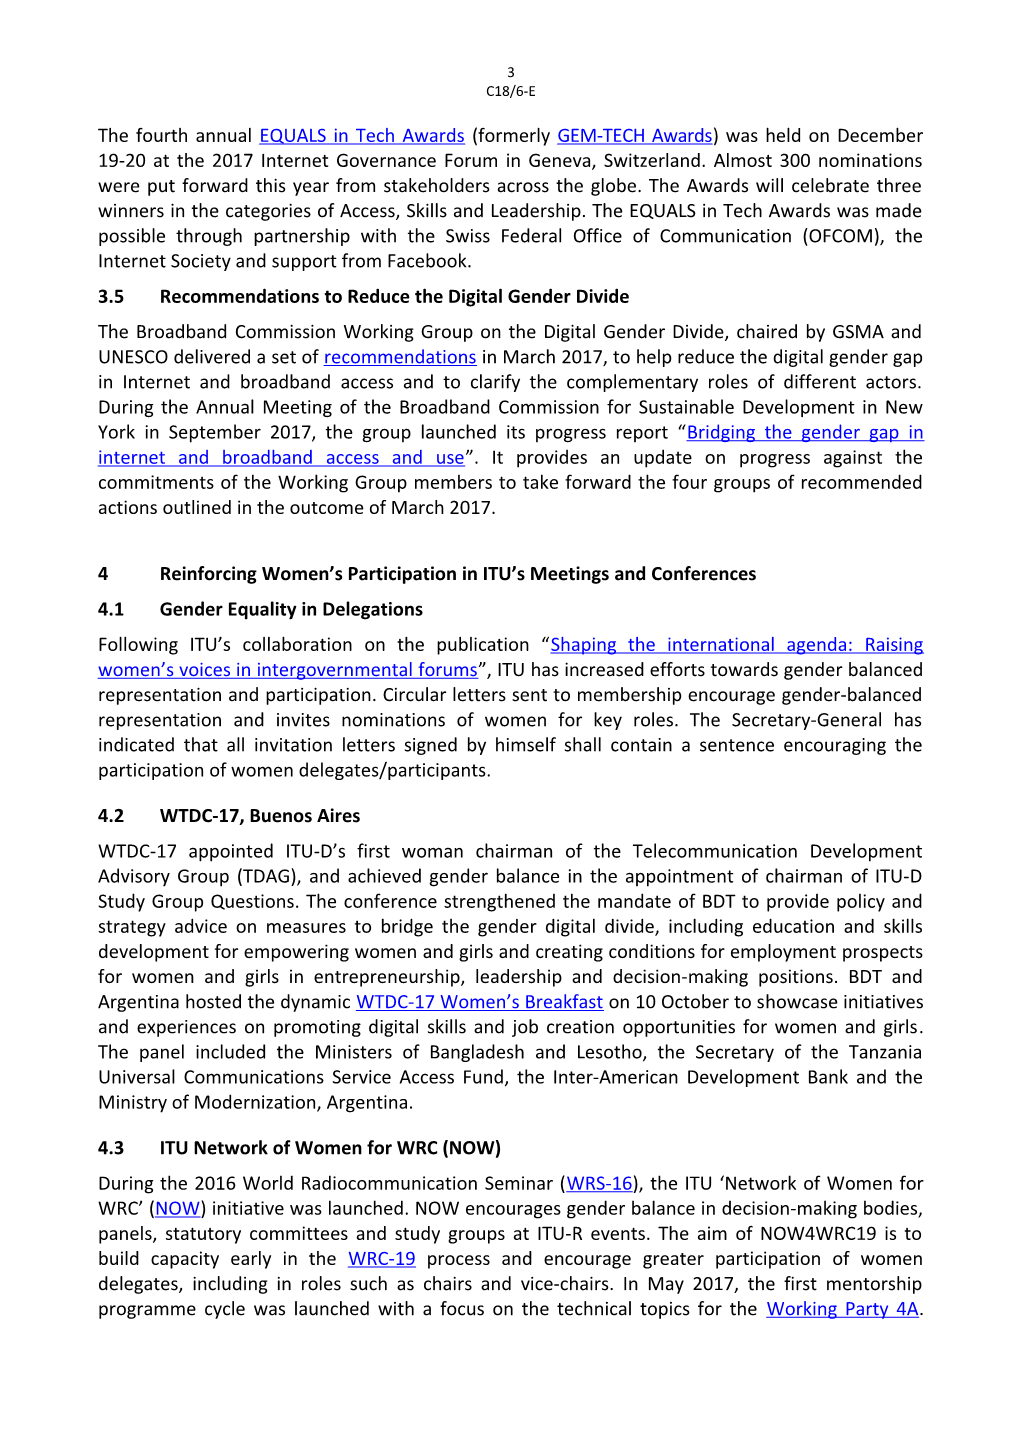 ITU's Activities Related to Resolution 70